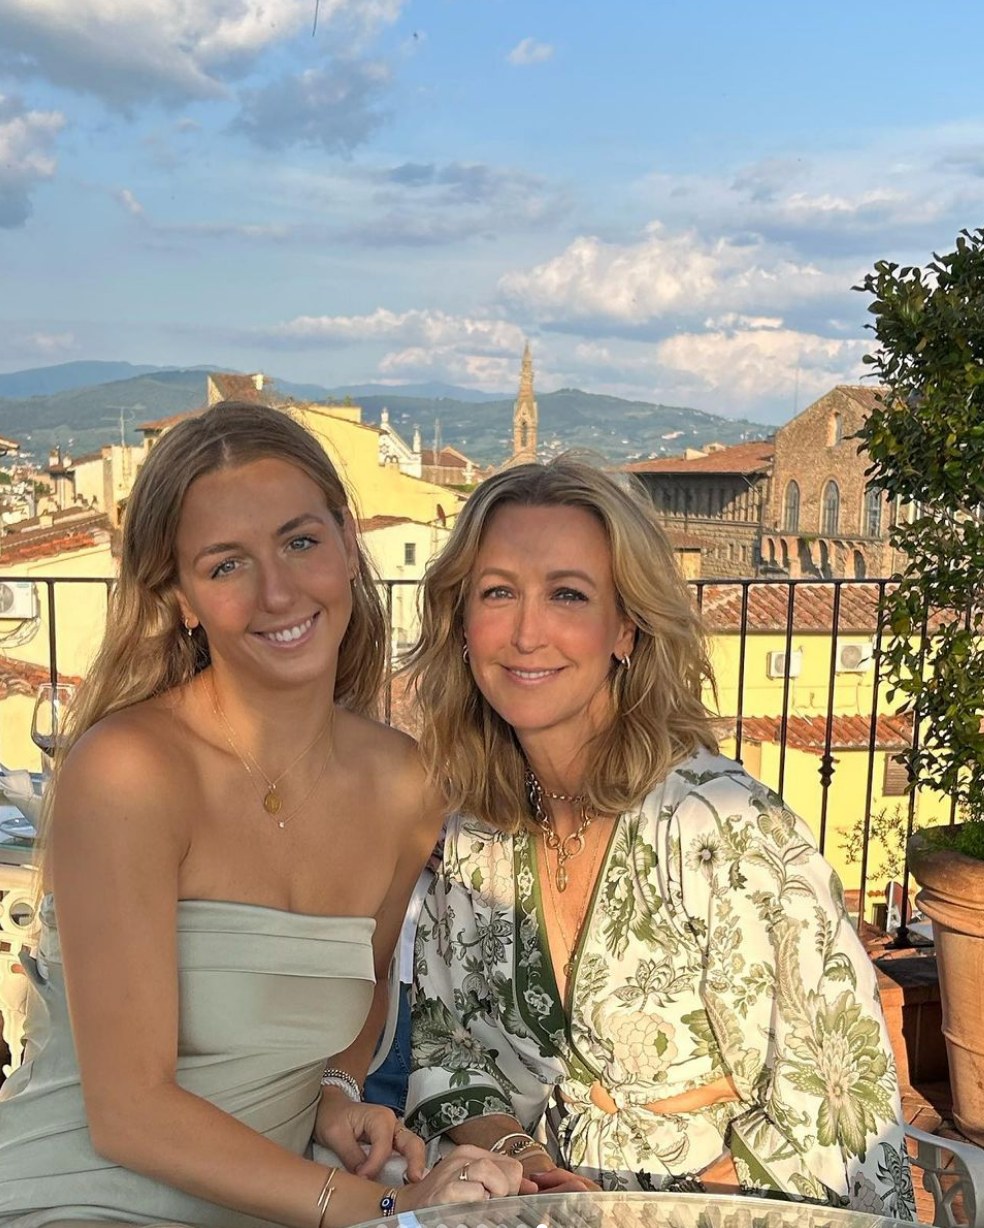 Photo shared by Lara Spencer on Instagram on June 4 from her daughter's graduation trip to Florence